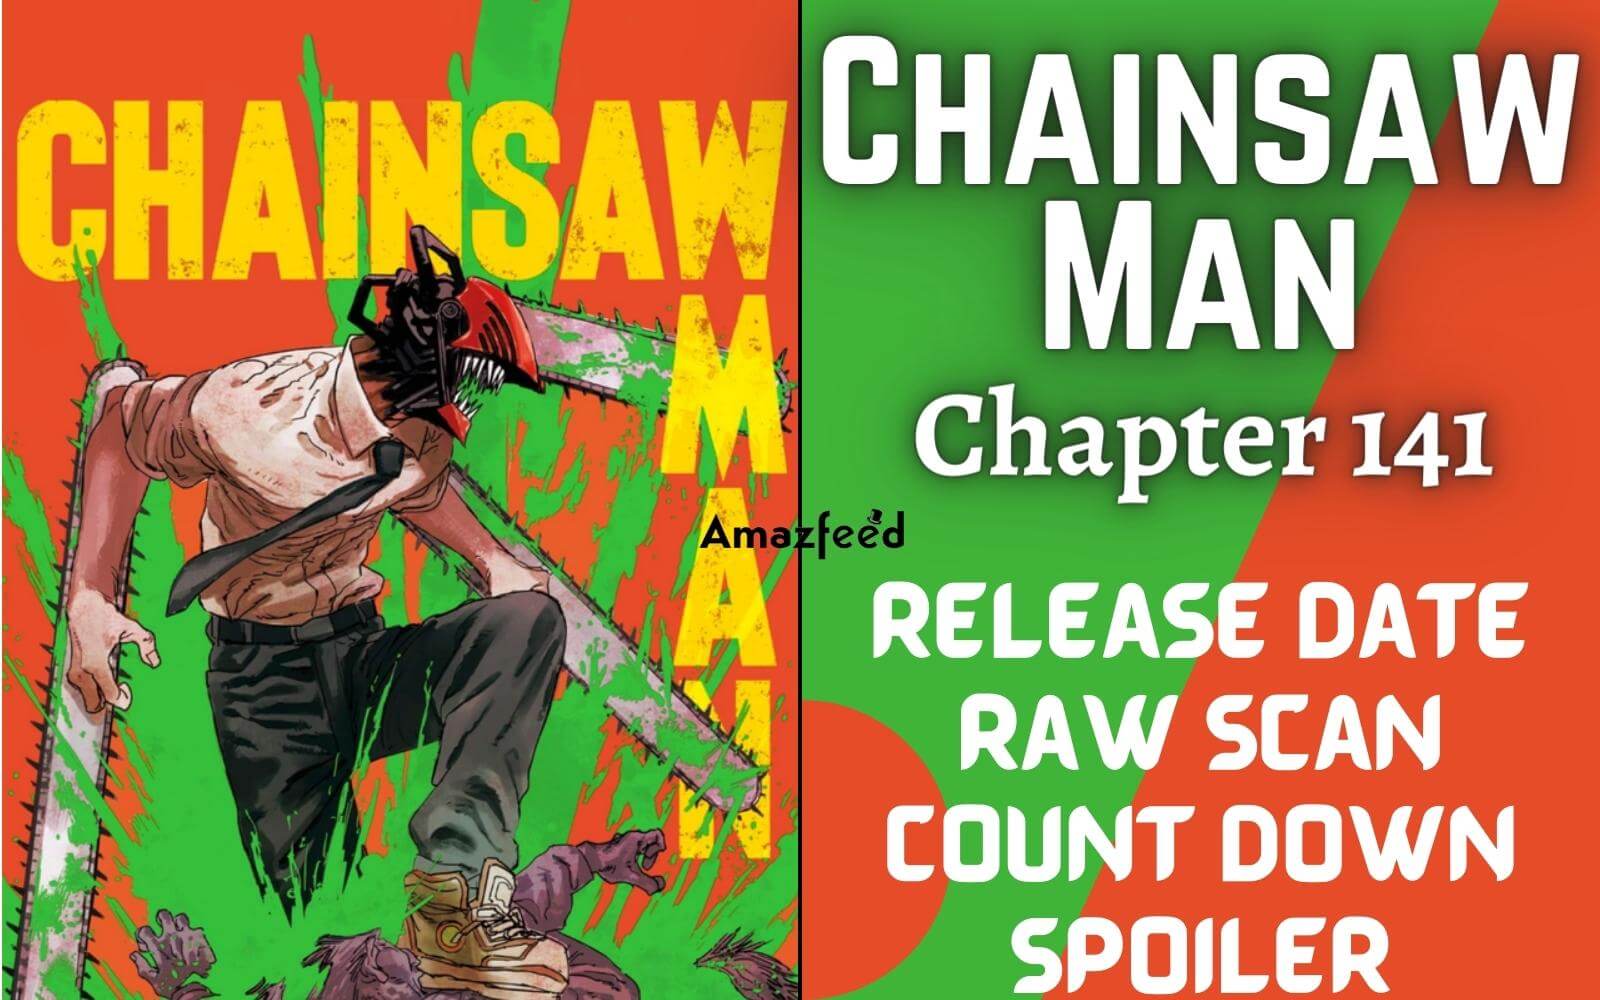 Chainsaw Man' Chapter 141 Release Date and Exact Release Time, Spoilers,  and More